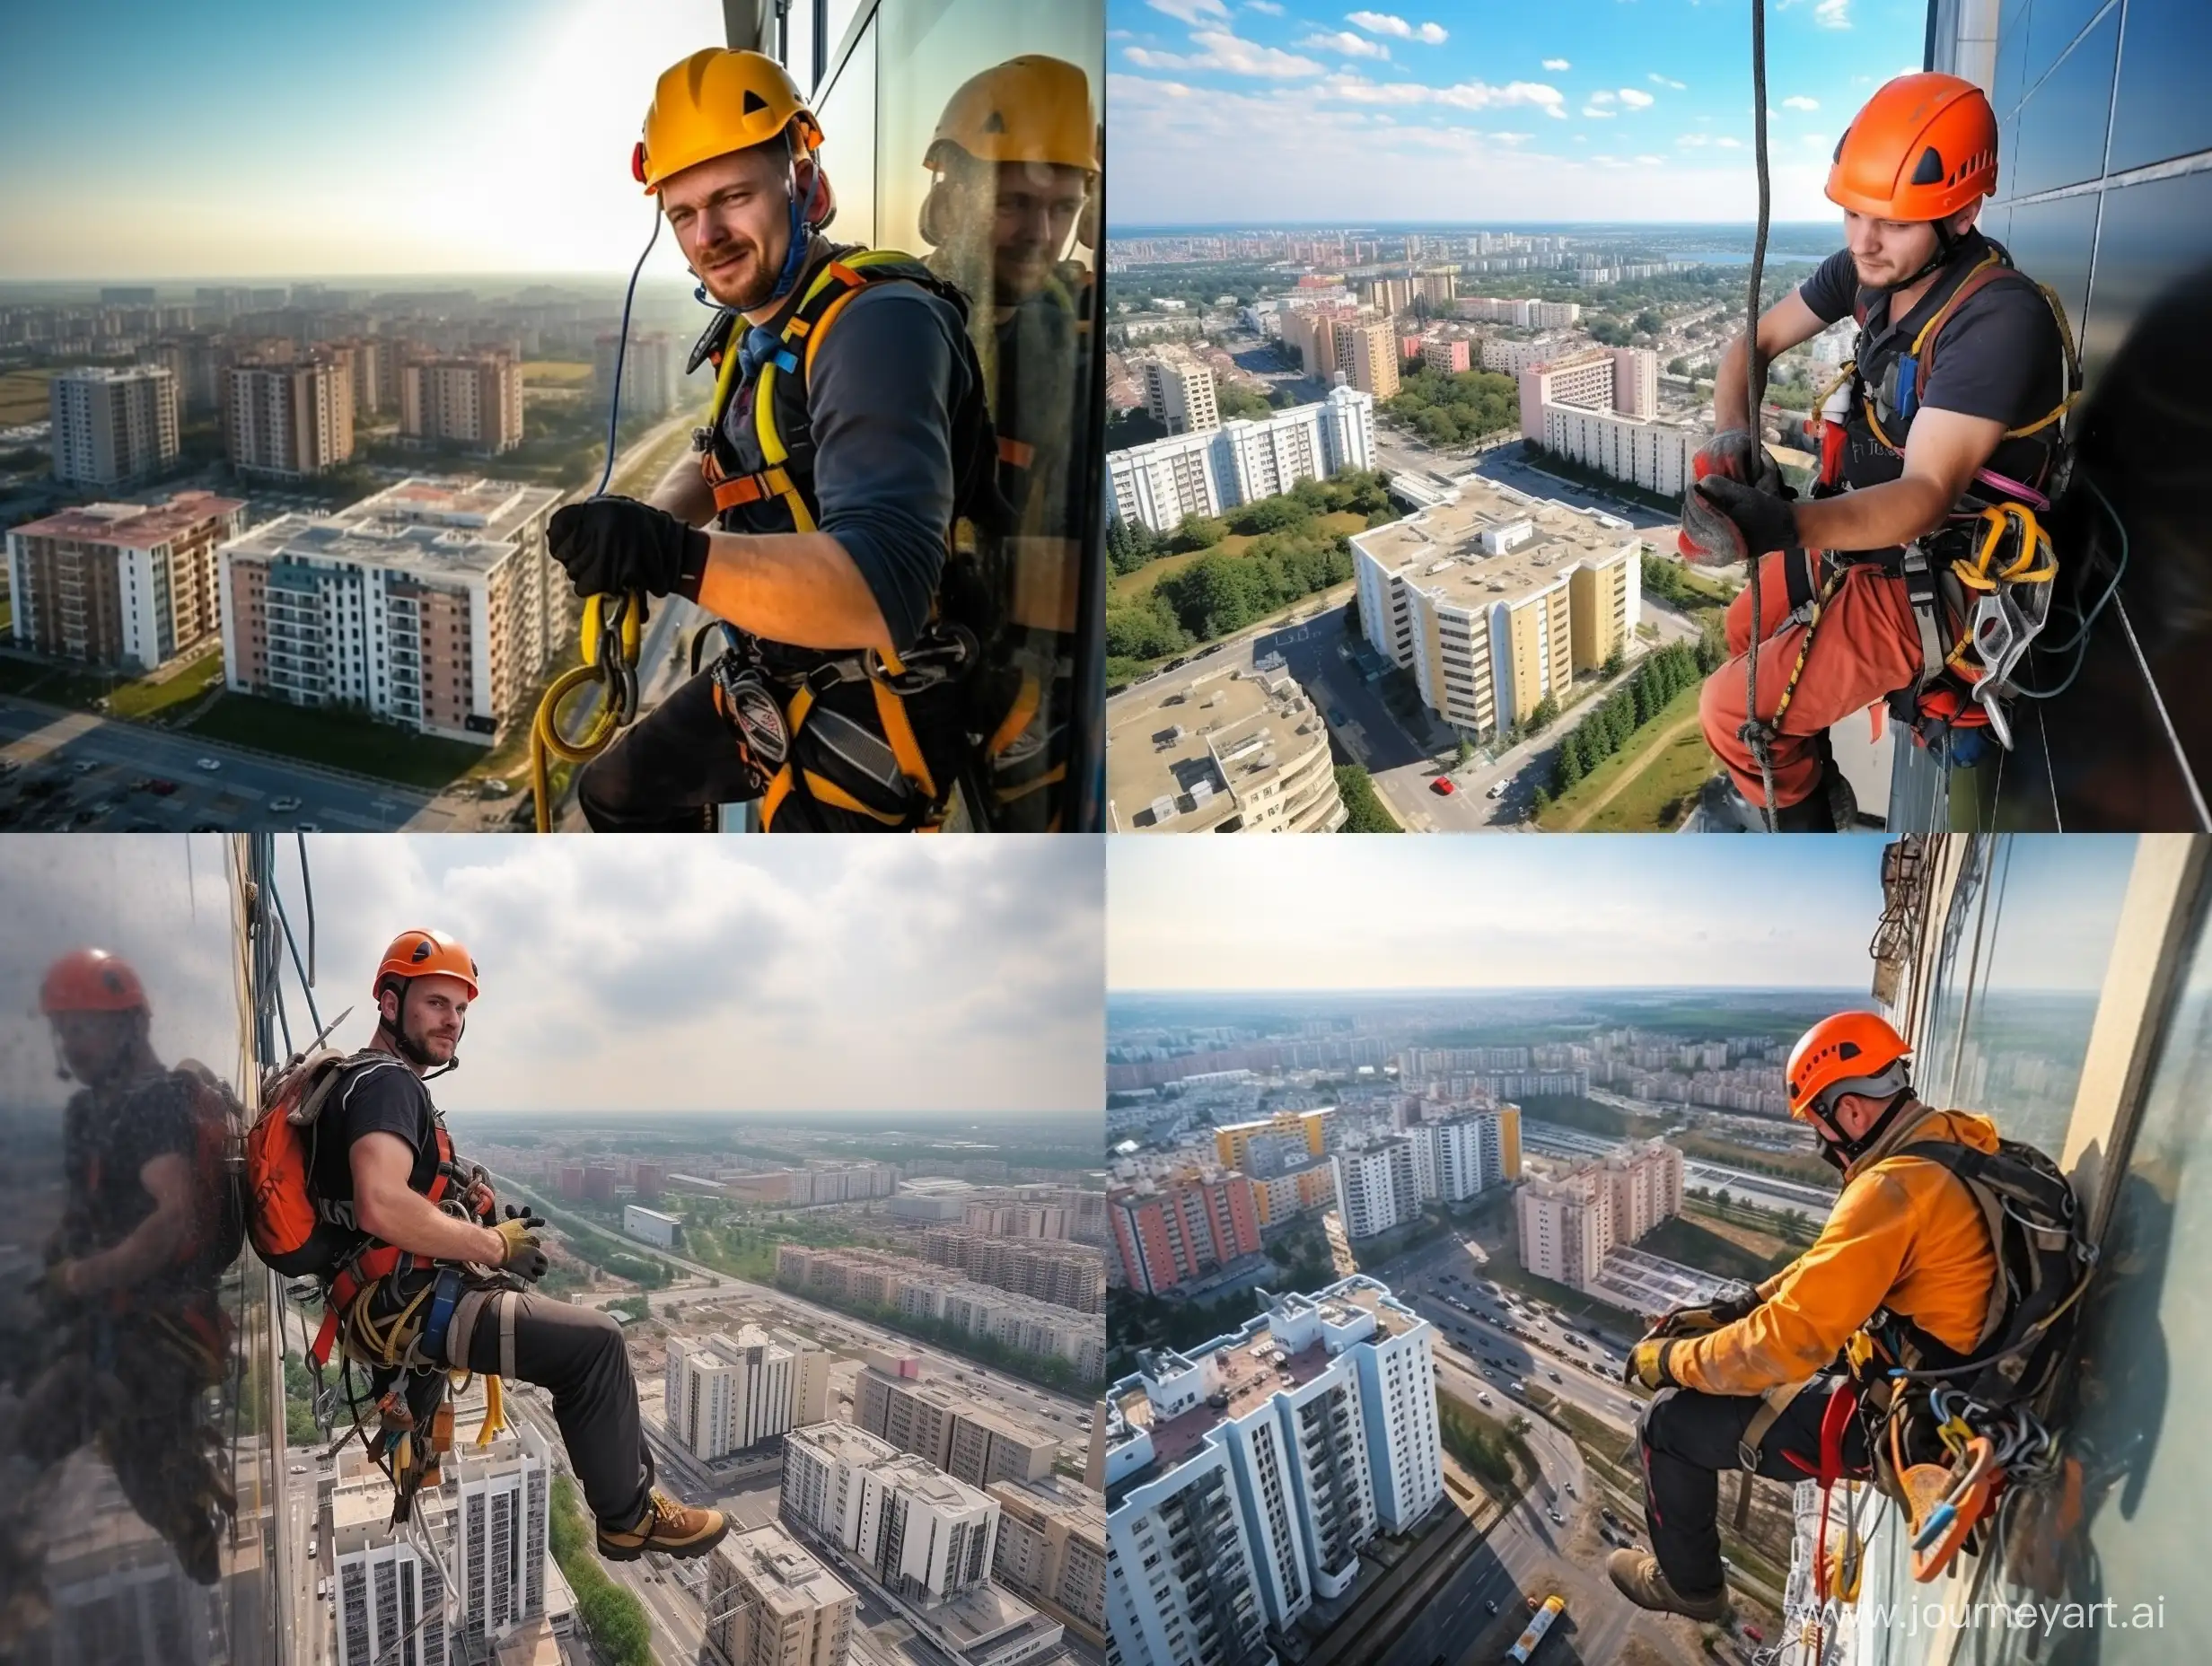 climber with petzl equipment, washes glass windows on a residential building in the city,  a rag in his hand, a bucket of water hanging nearby, against the backdrop of Lakhta center